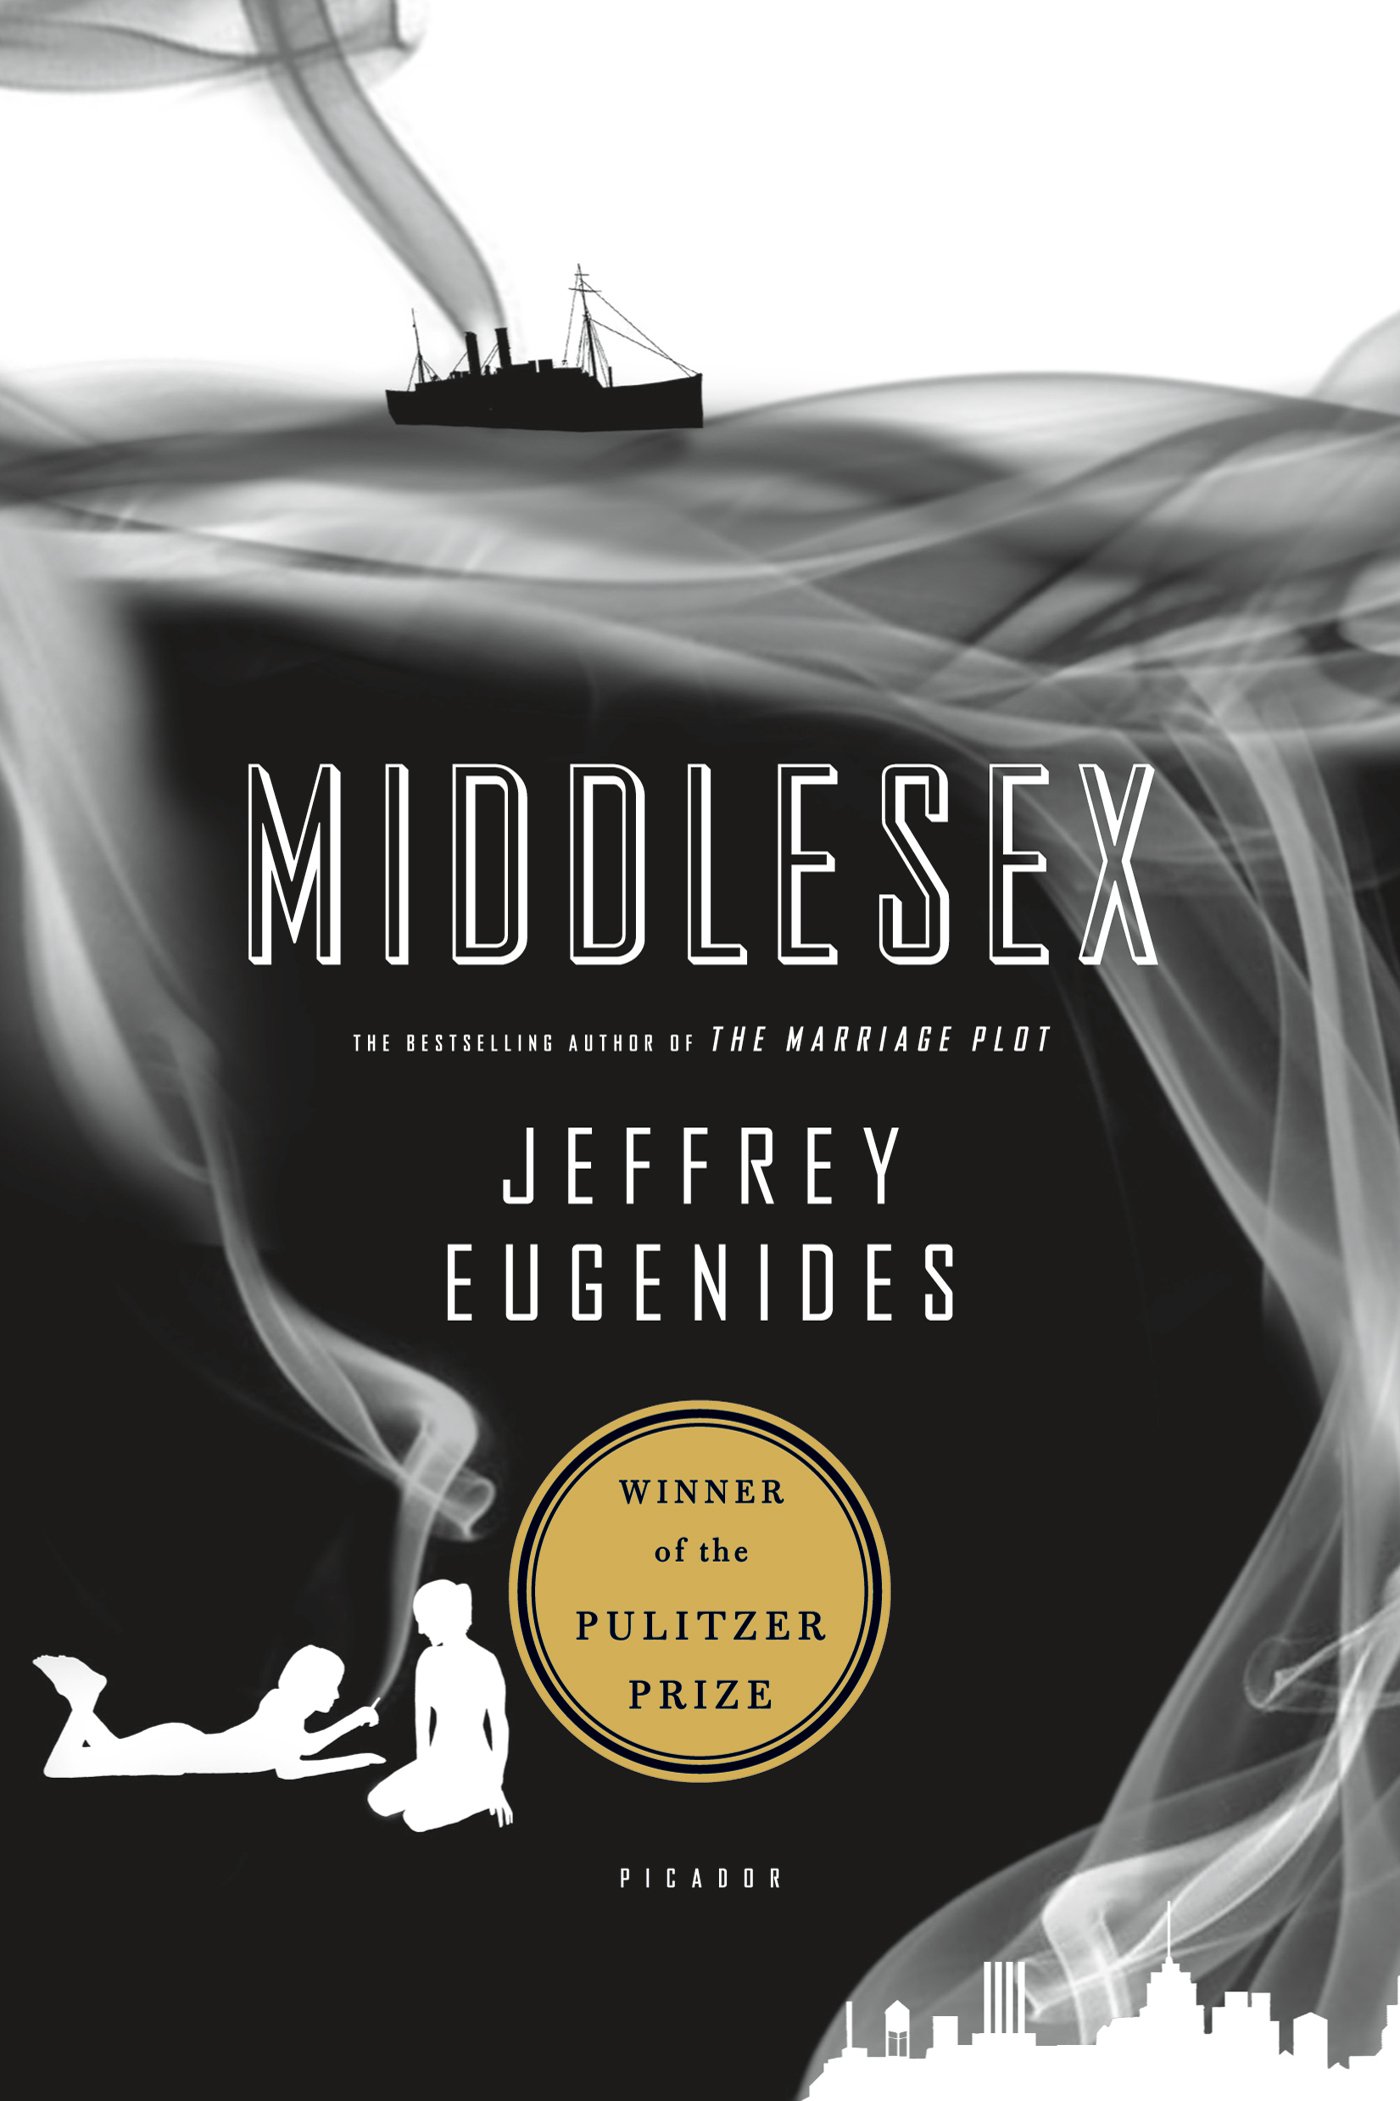 book cover - Middlesex